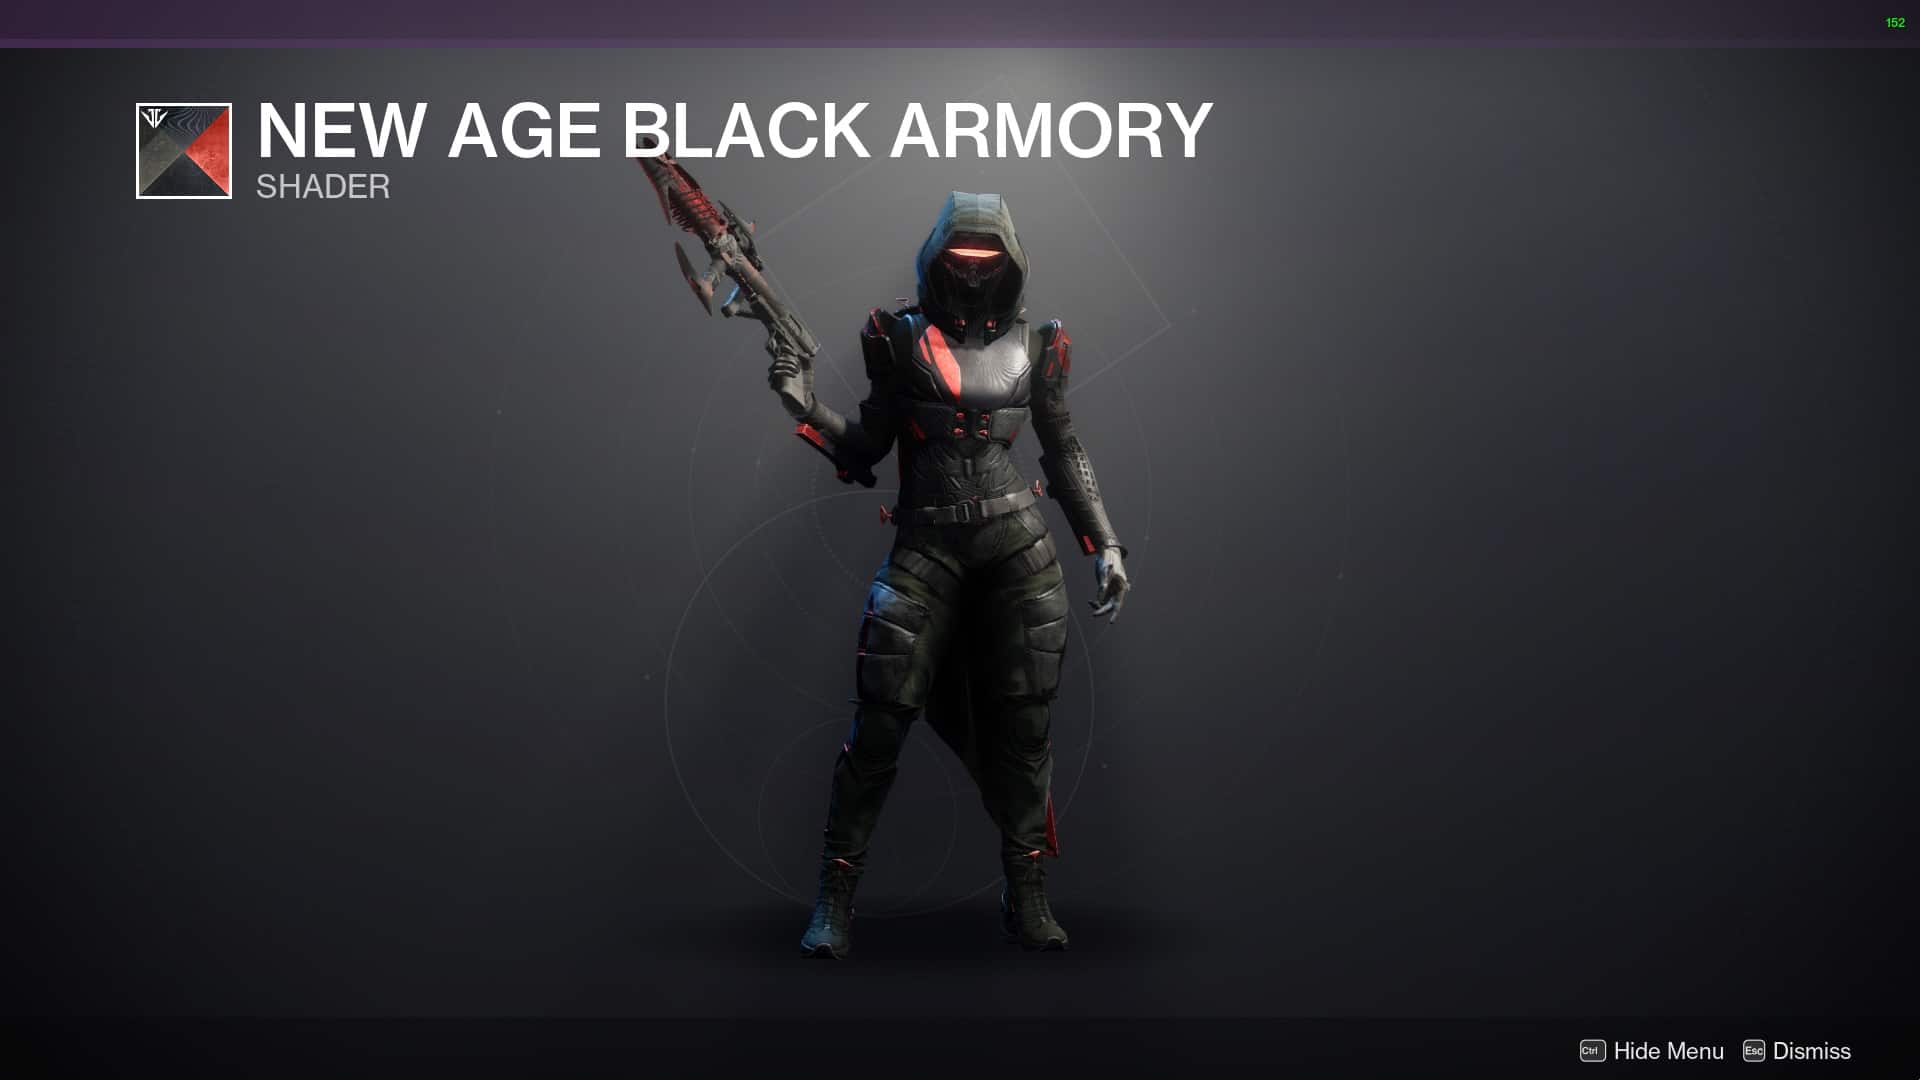 New Age Black Armory Shader featured